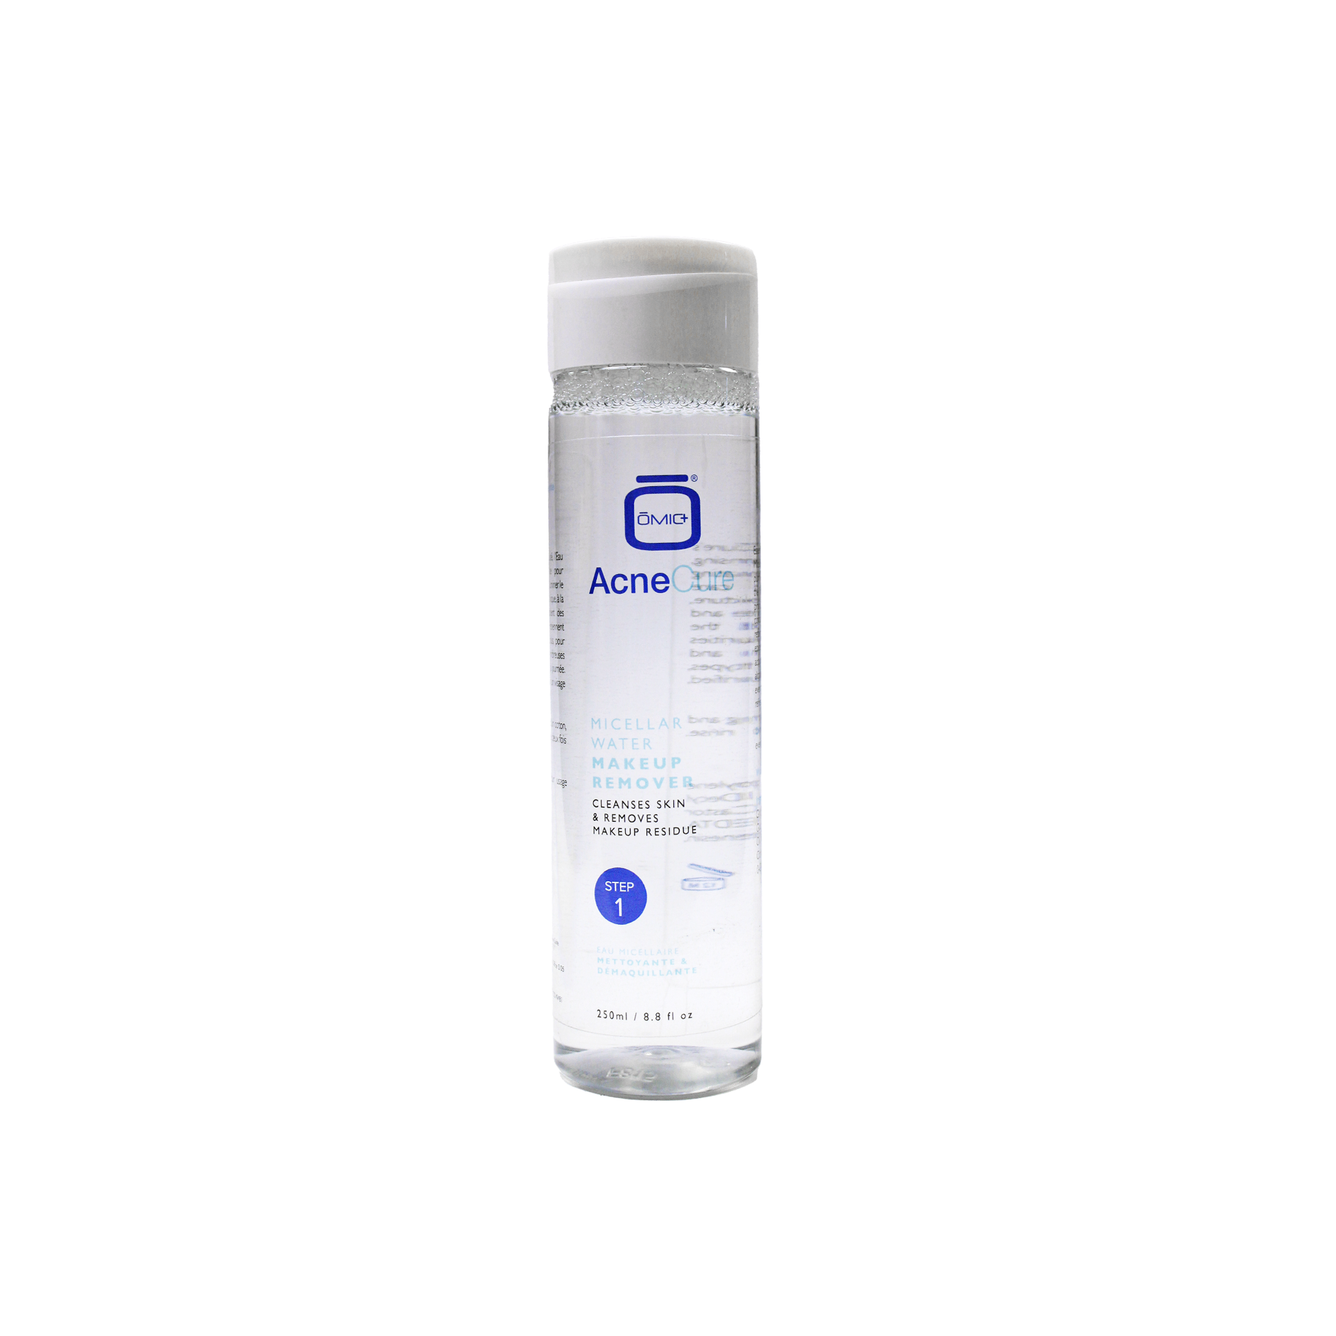 Omic+ AcneCure Micellar Water Makeup Remover 250ml